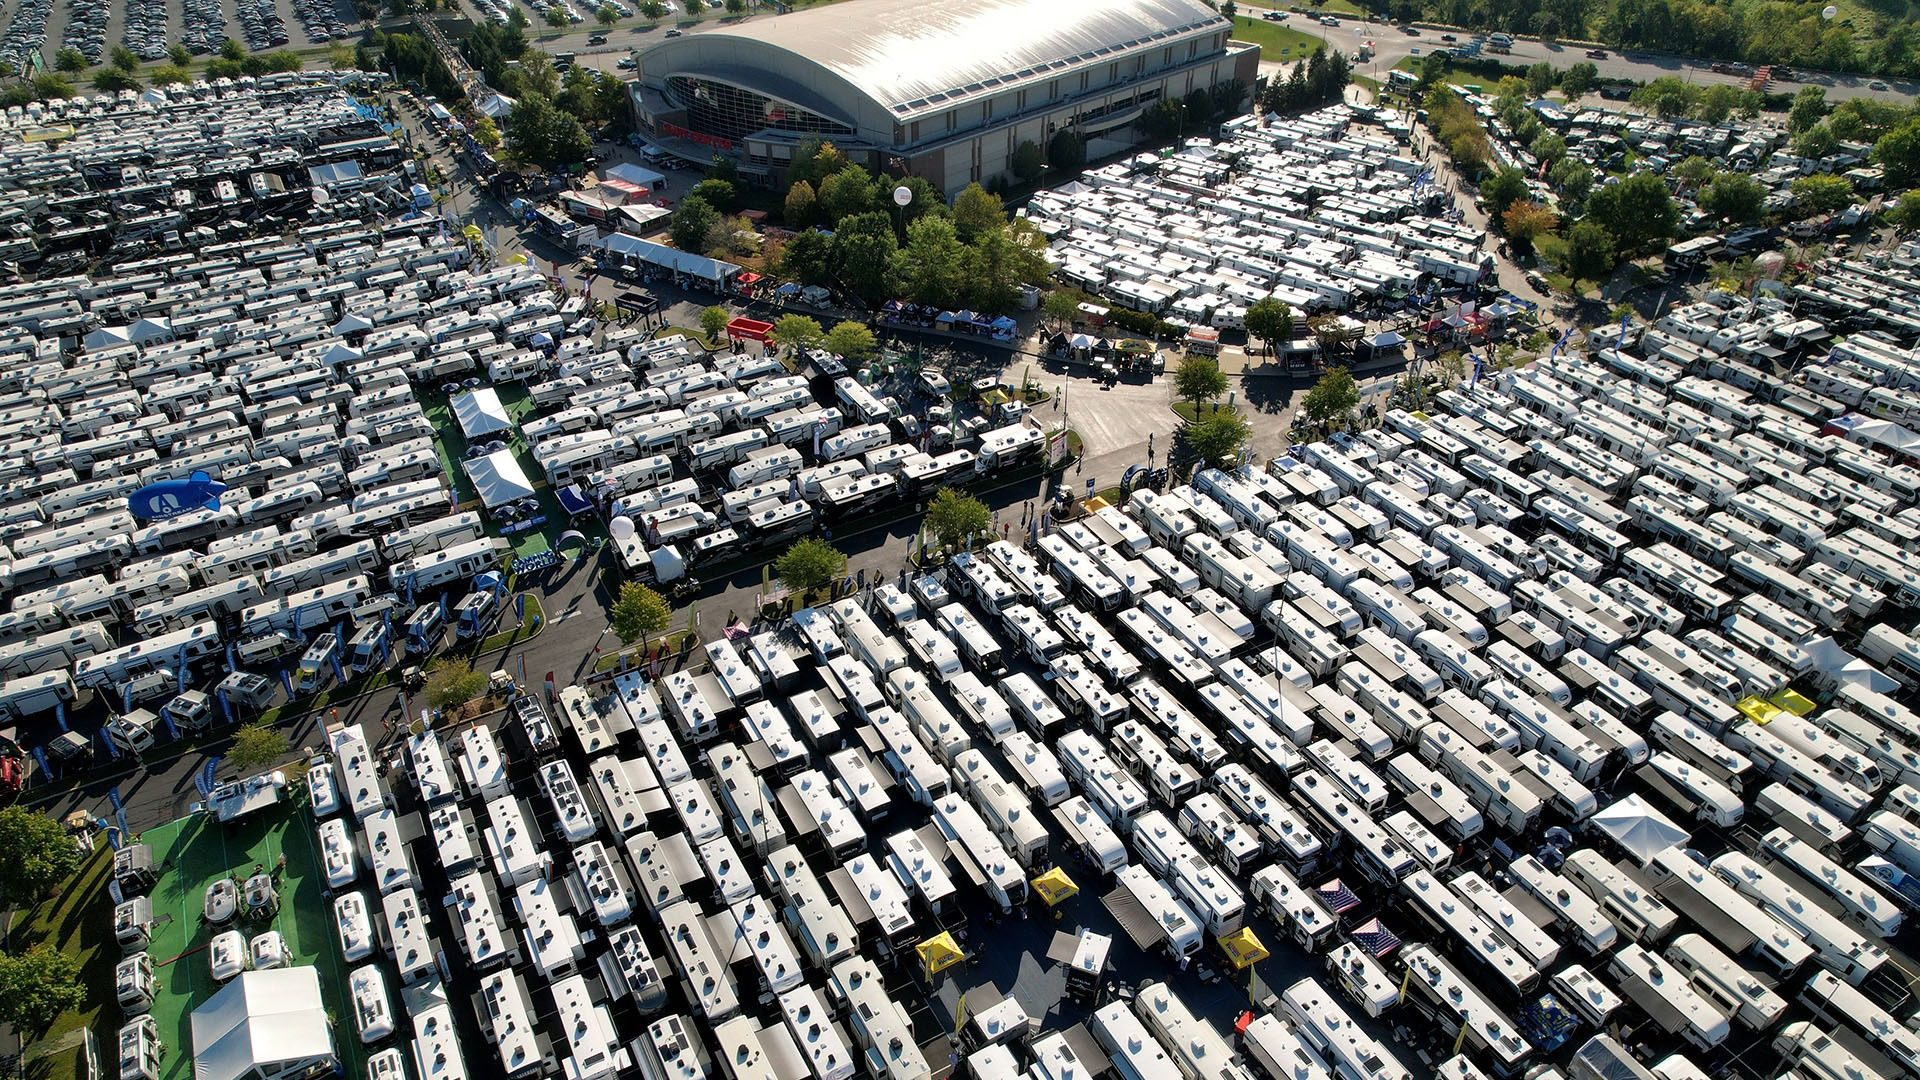 Hersey RV Show birds eye view from above. Hundreds of RVs